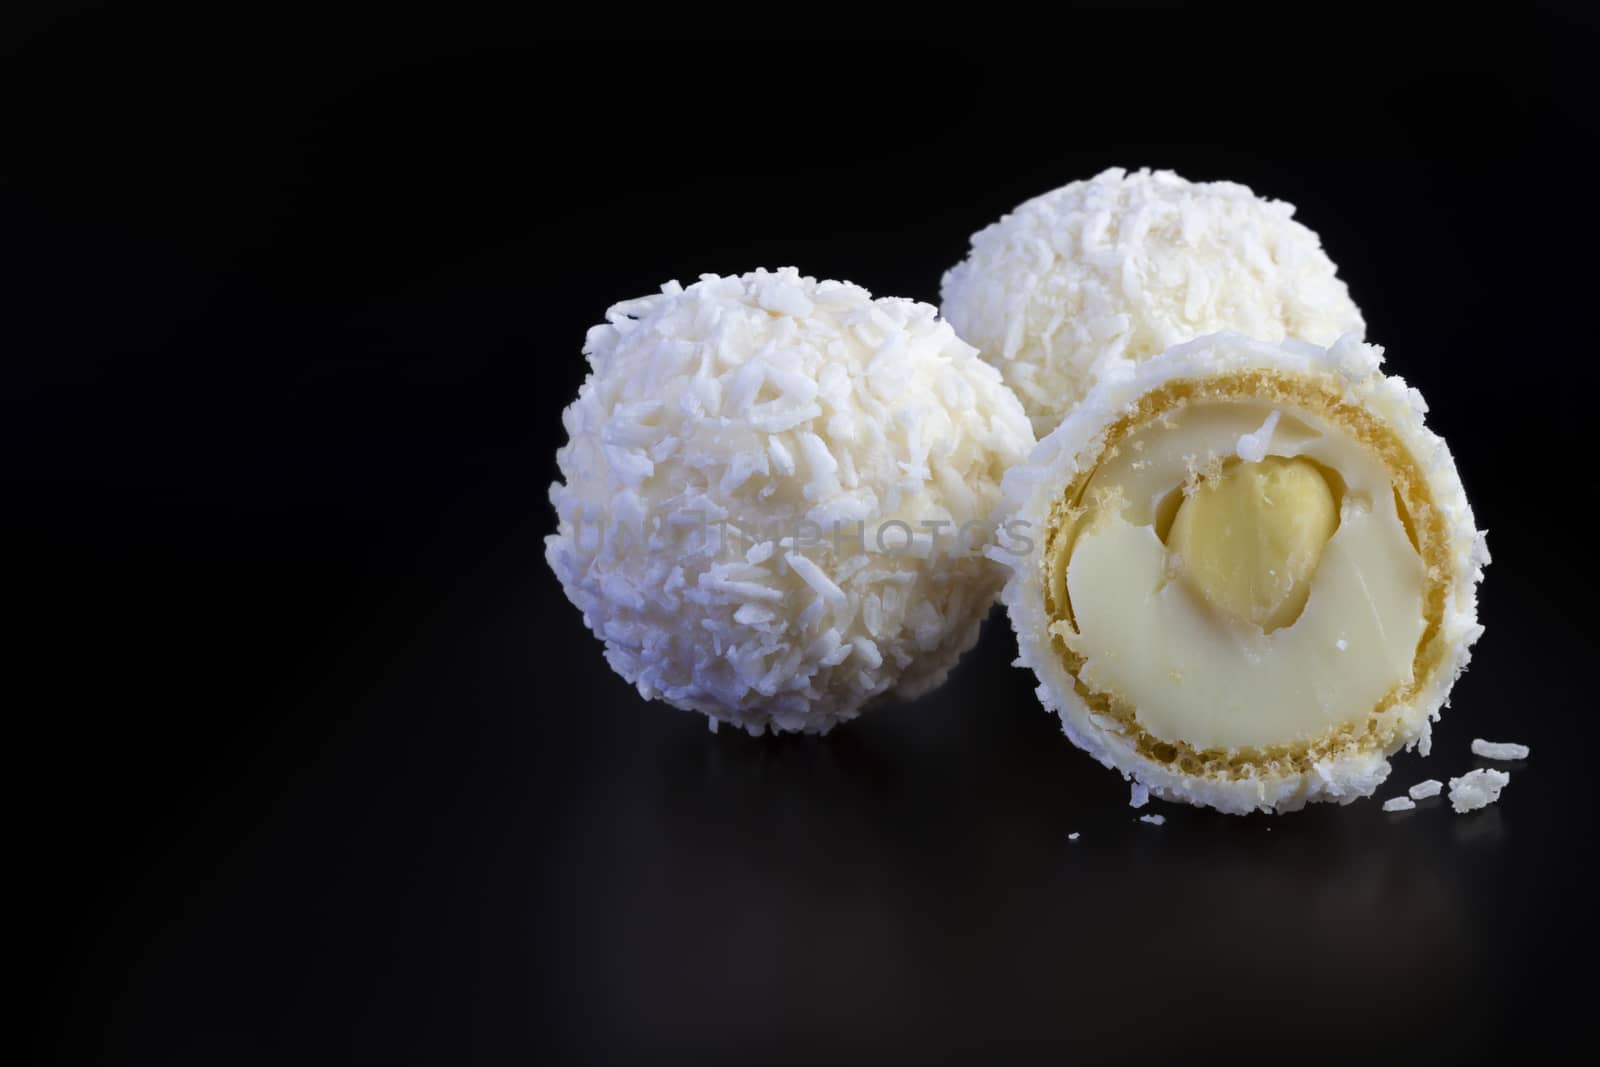 coconut balls on black background by manaemedia